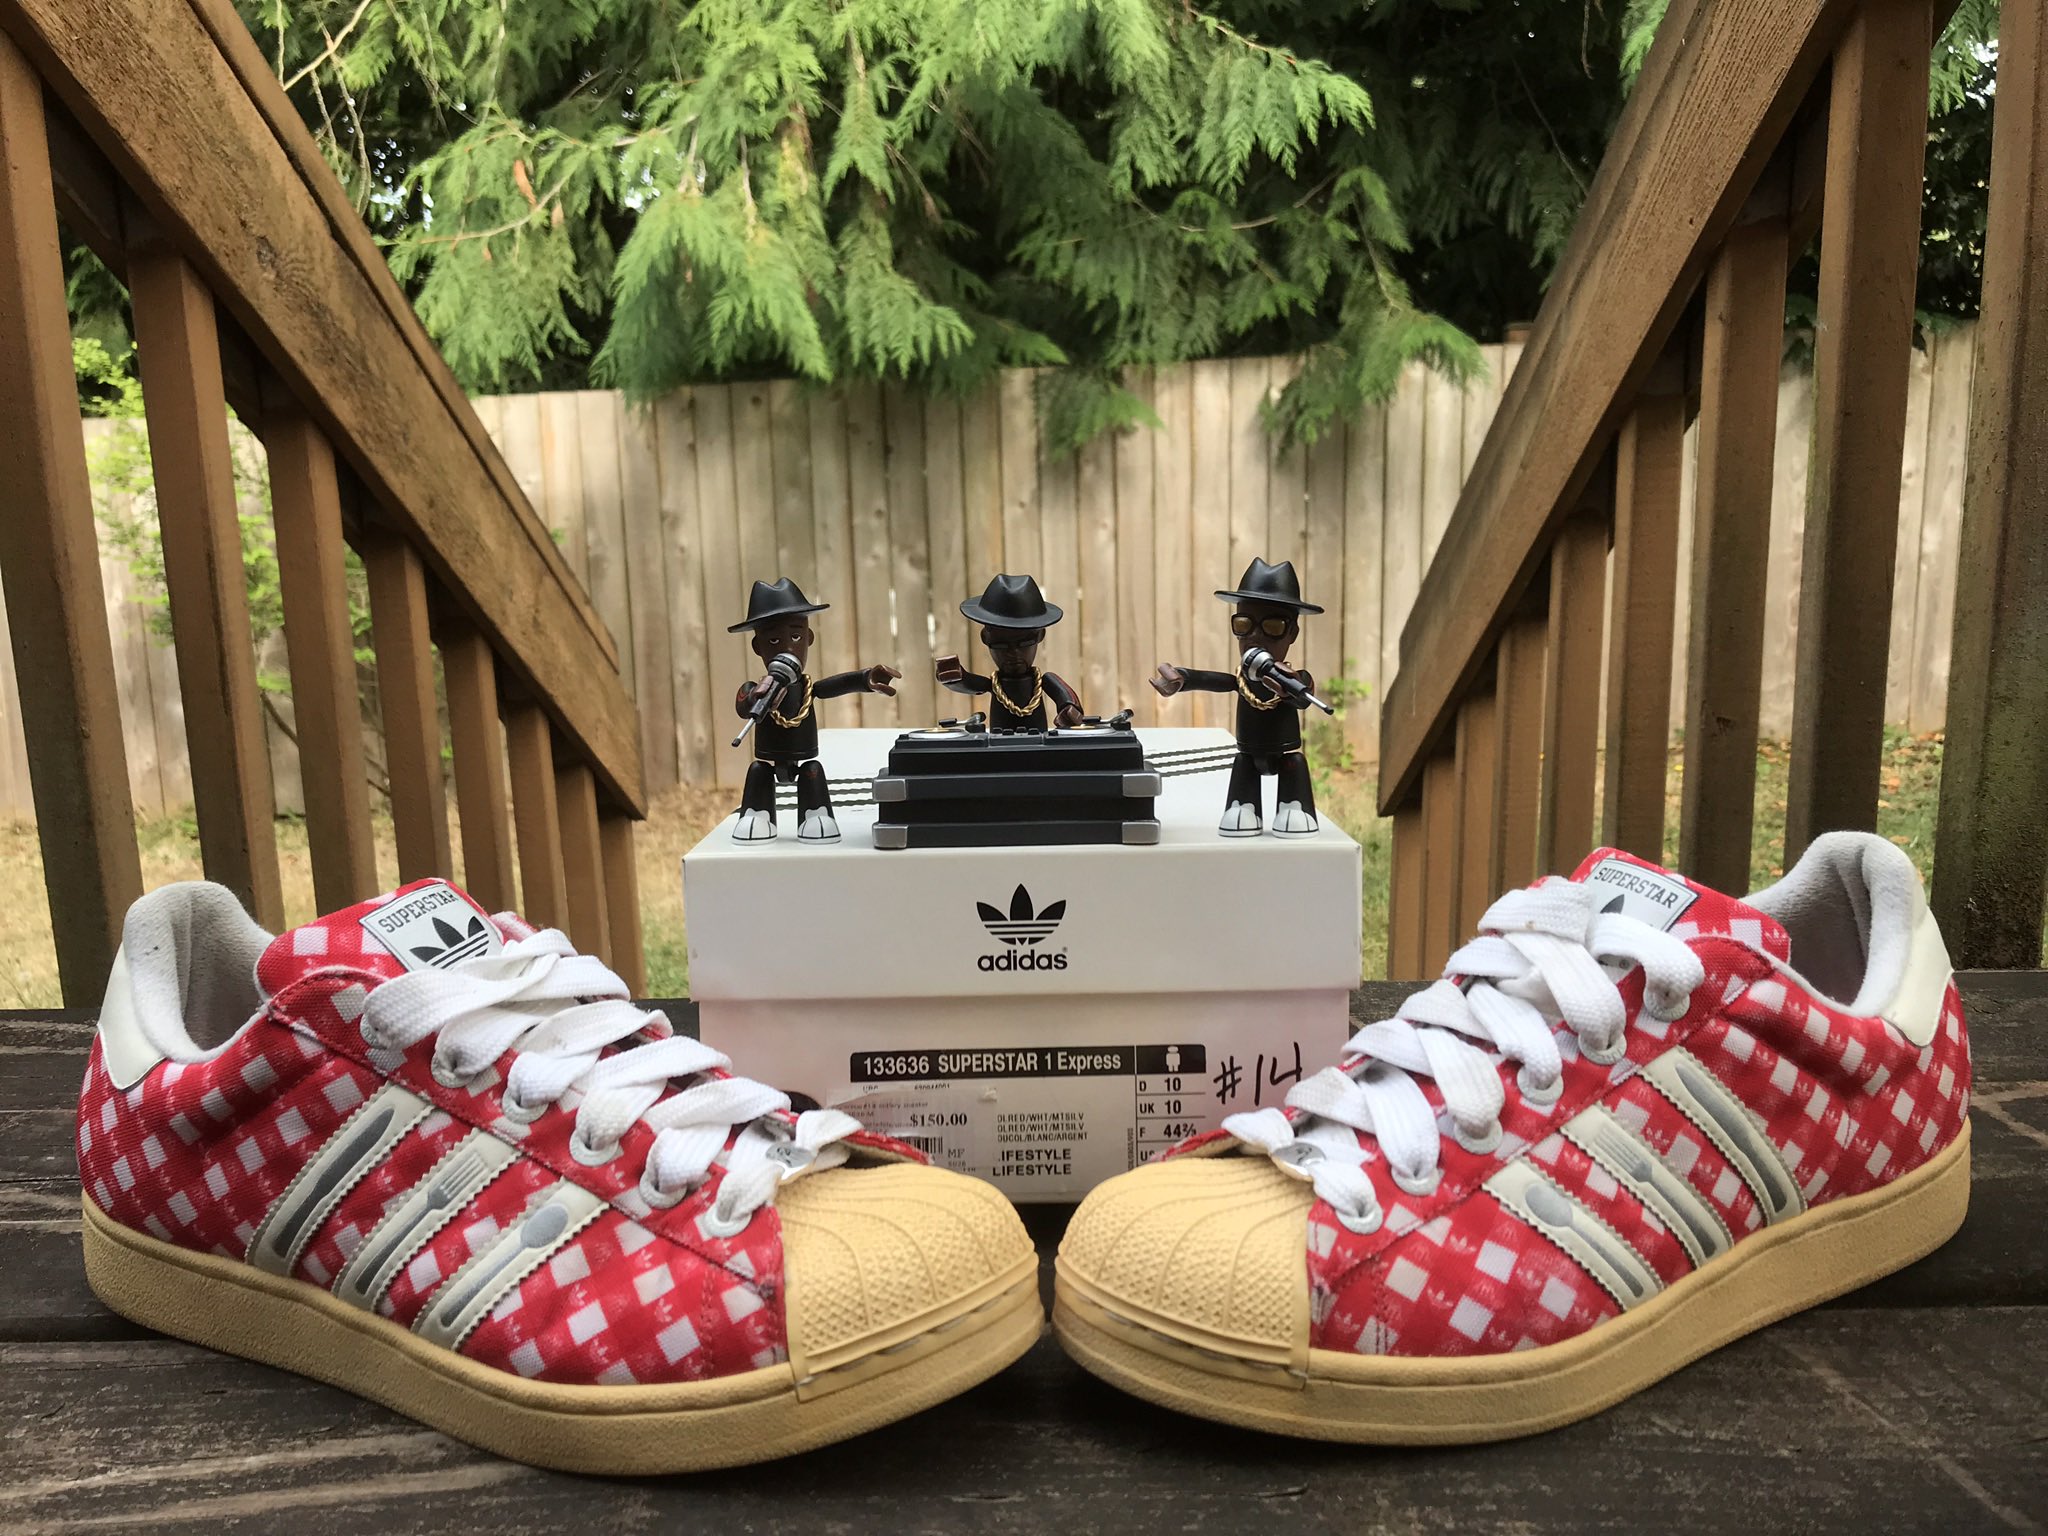 ExtraGuac on Twitter: "@atmos_usa My favorite goes back to 2005. The Adidas  x UpperPlayground Superstar 35th anniversary. I love BBQ food and for this  to be inspired by one of the best